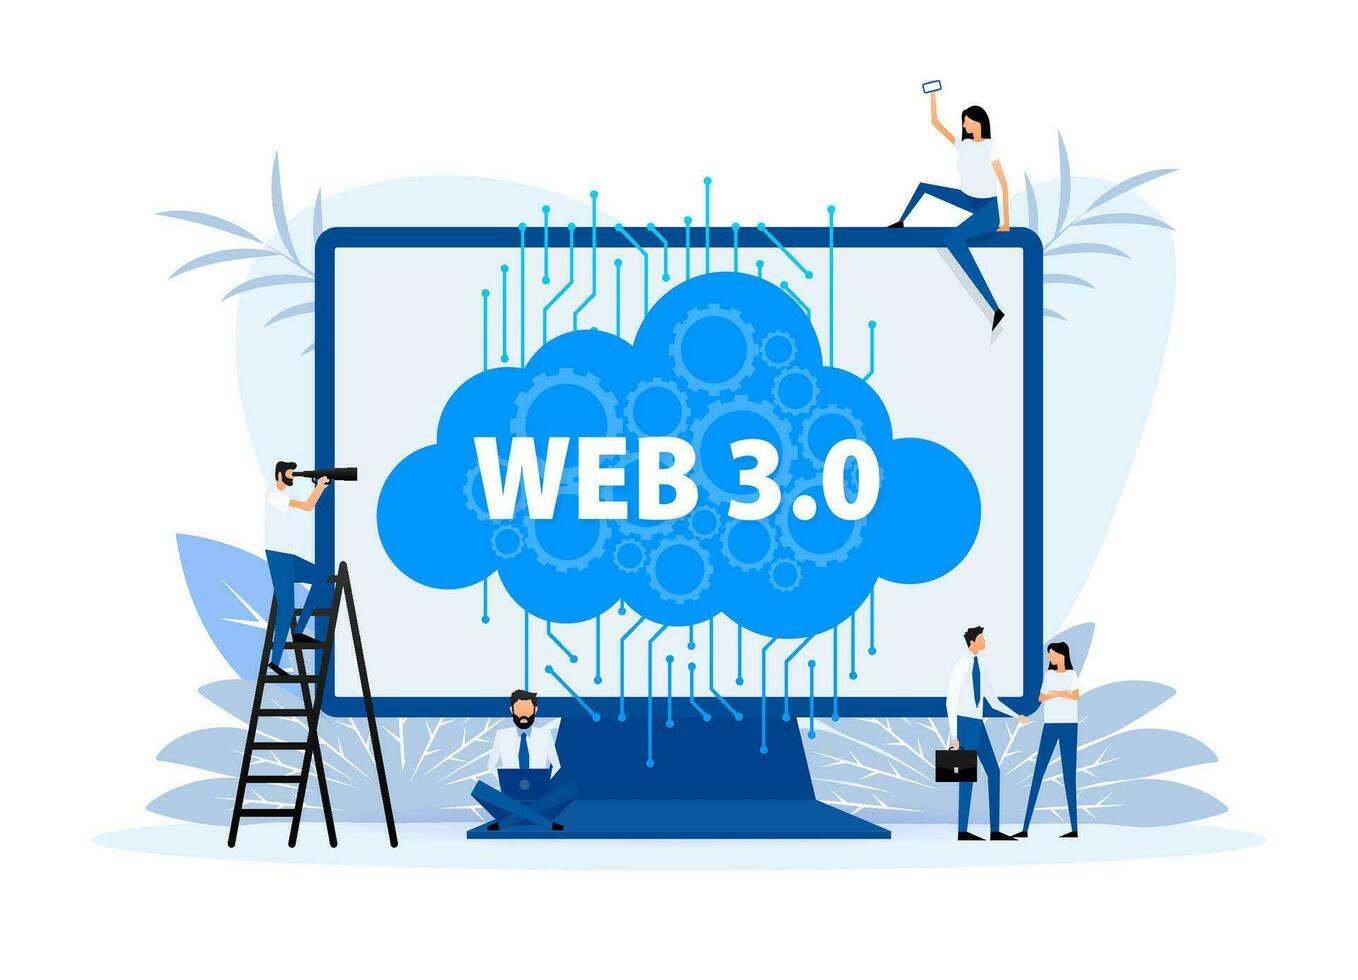 Web 3.0 is a new generation of the Internet. Internet blockchain technology. vector